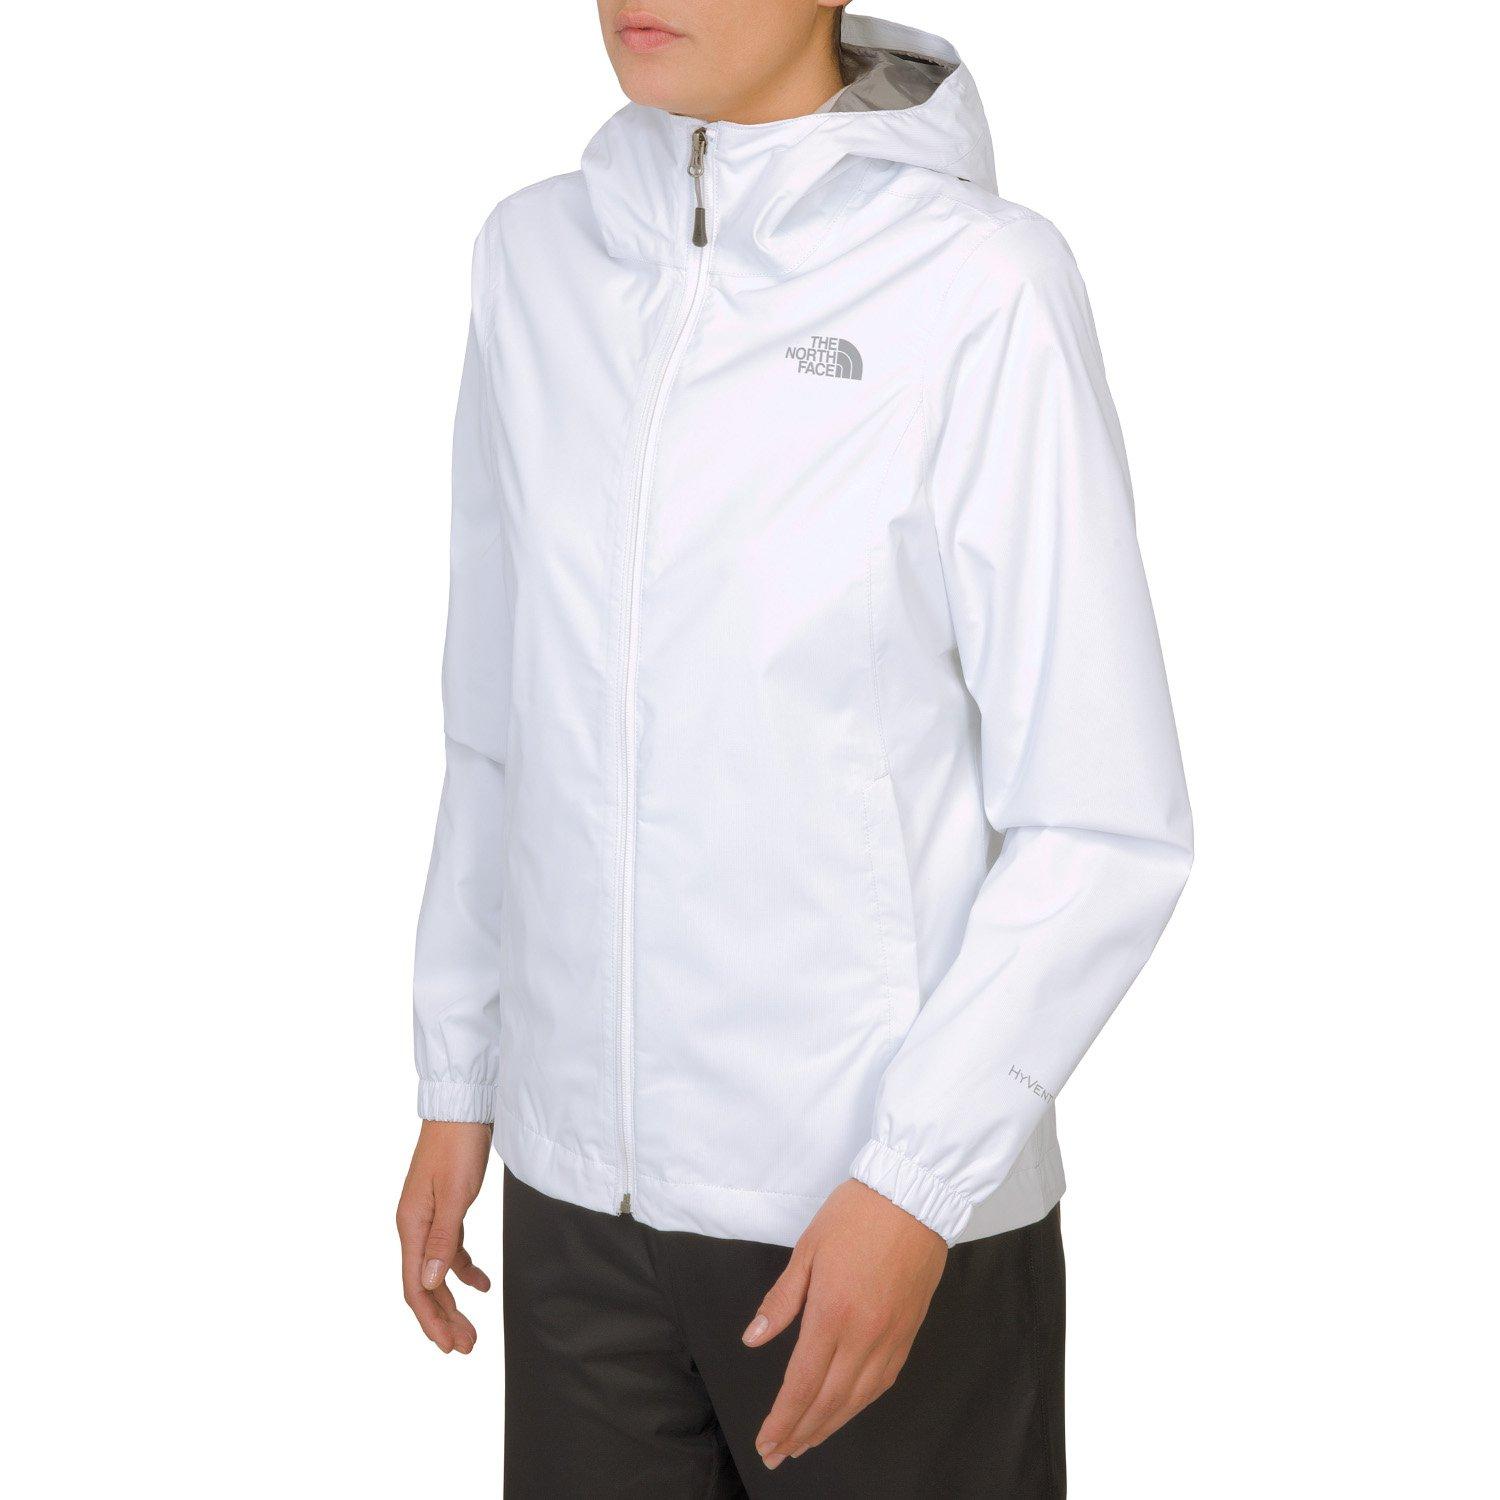 north face quest jacket womens